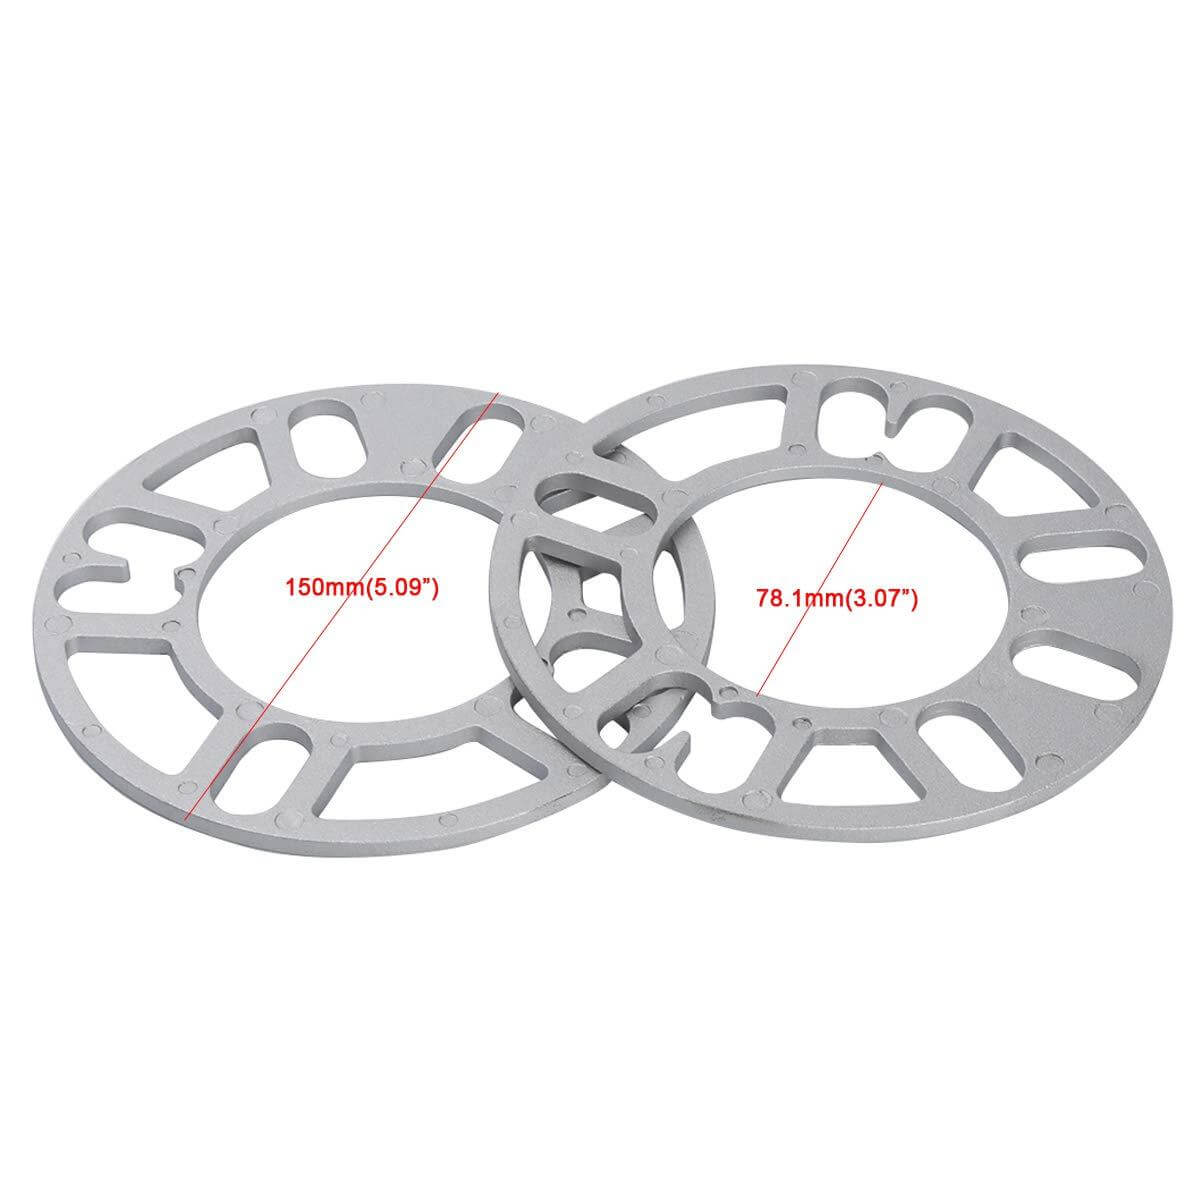 Wheel Spacers 5mm Universal For Jeep Nissan Honda 4 and 5 Lug PCD 98-120 xccscss.